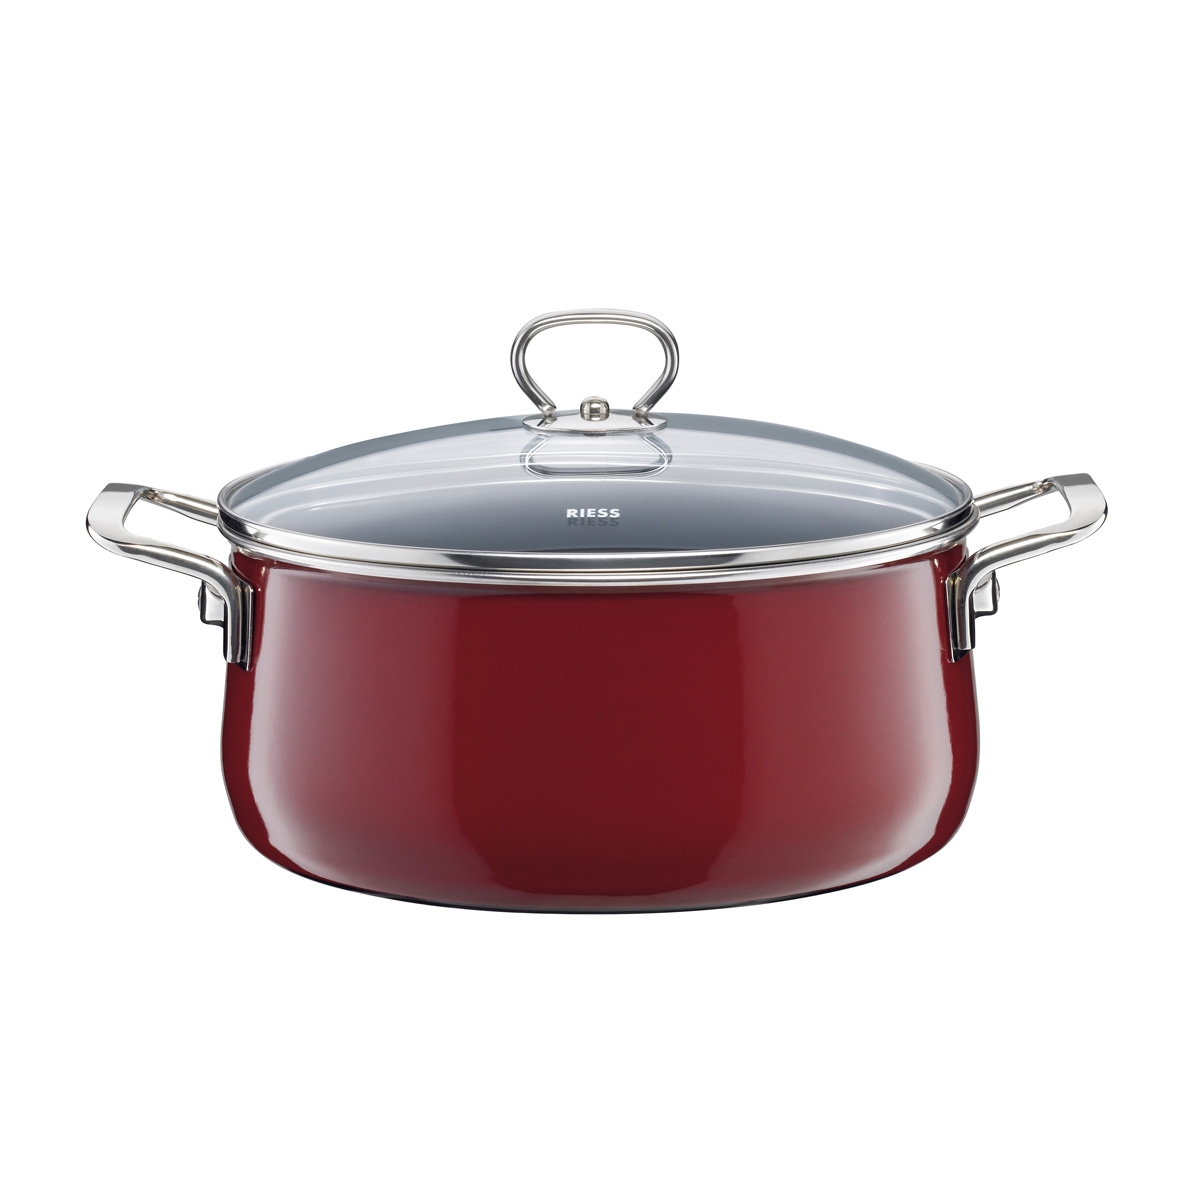 Riess Nouvelle Rosso extra stark Kasserolle mit Glasdeckel 24 cm / 4,0 L - Emaille